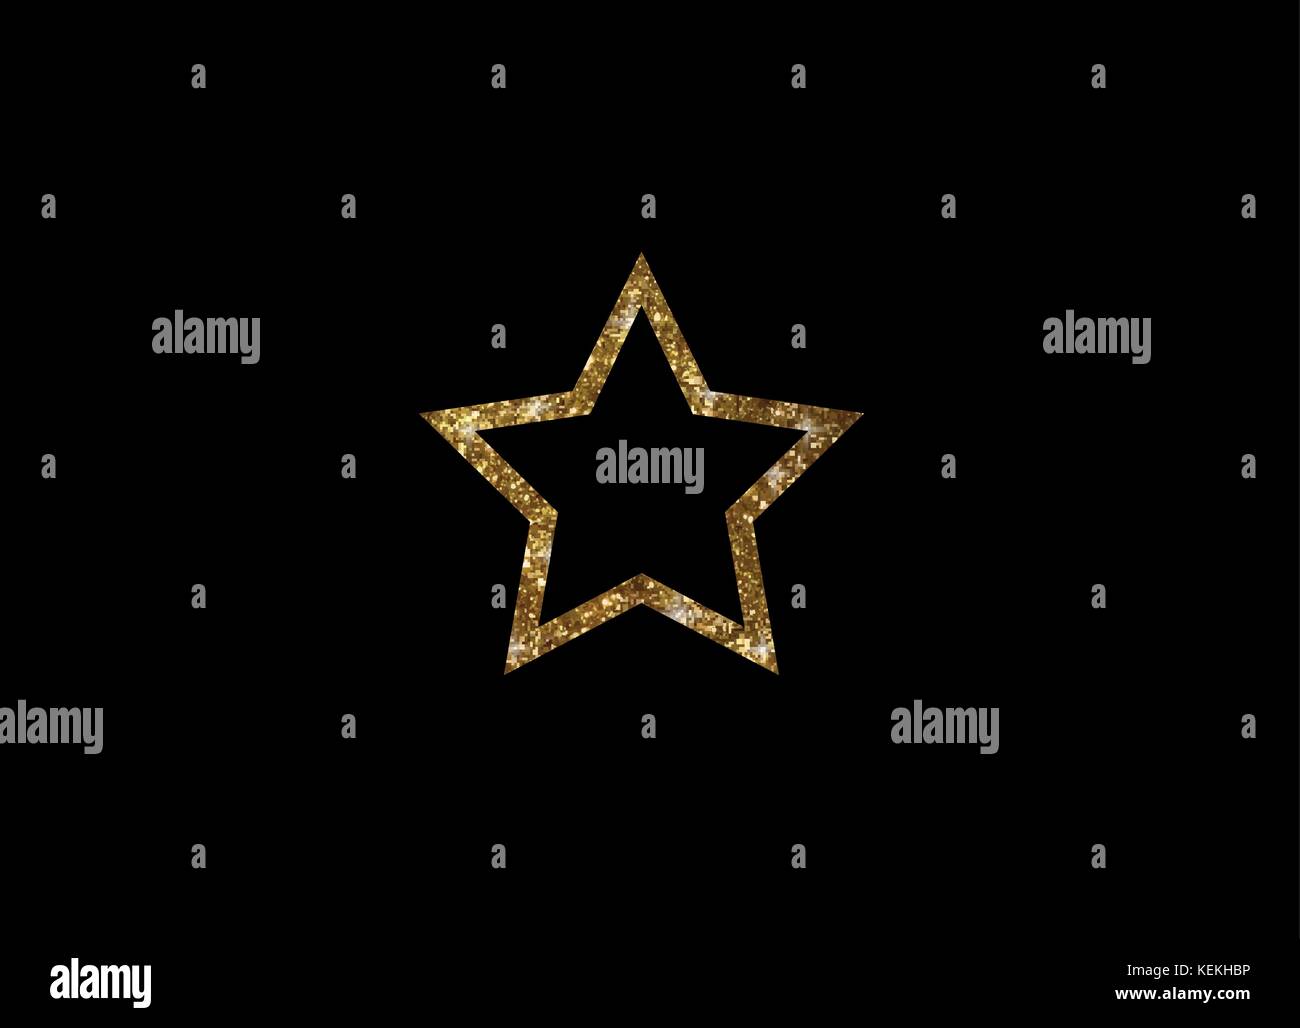 The vector golden glitter review star icon on black background Stock Vector